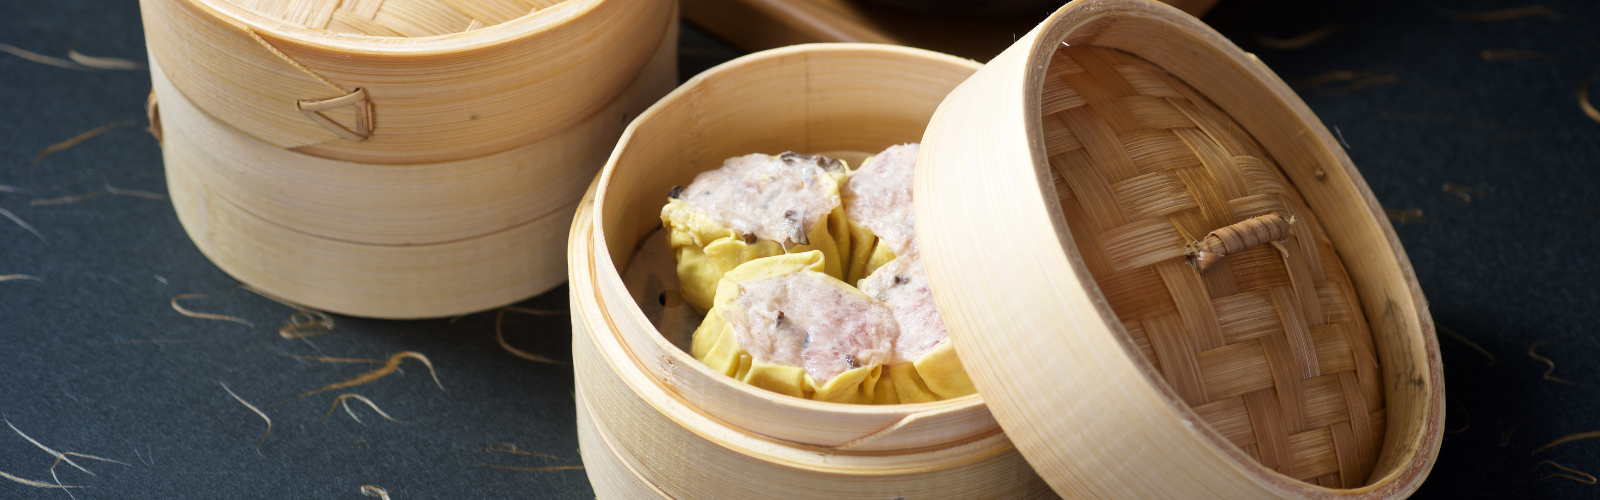 Dim sum and Asian fusion restaurant in Brooklyn, featuring traditional Asian dishes and fusion cuisine.